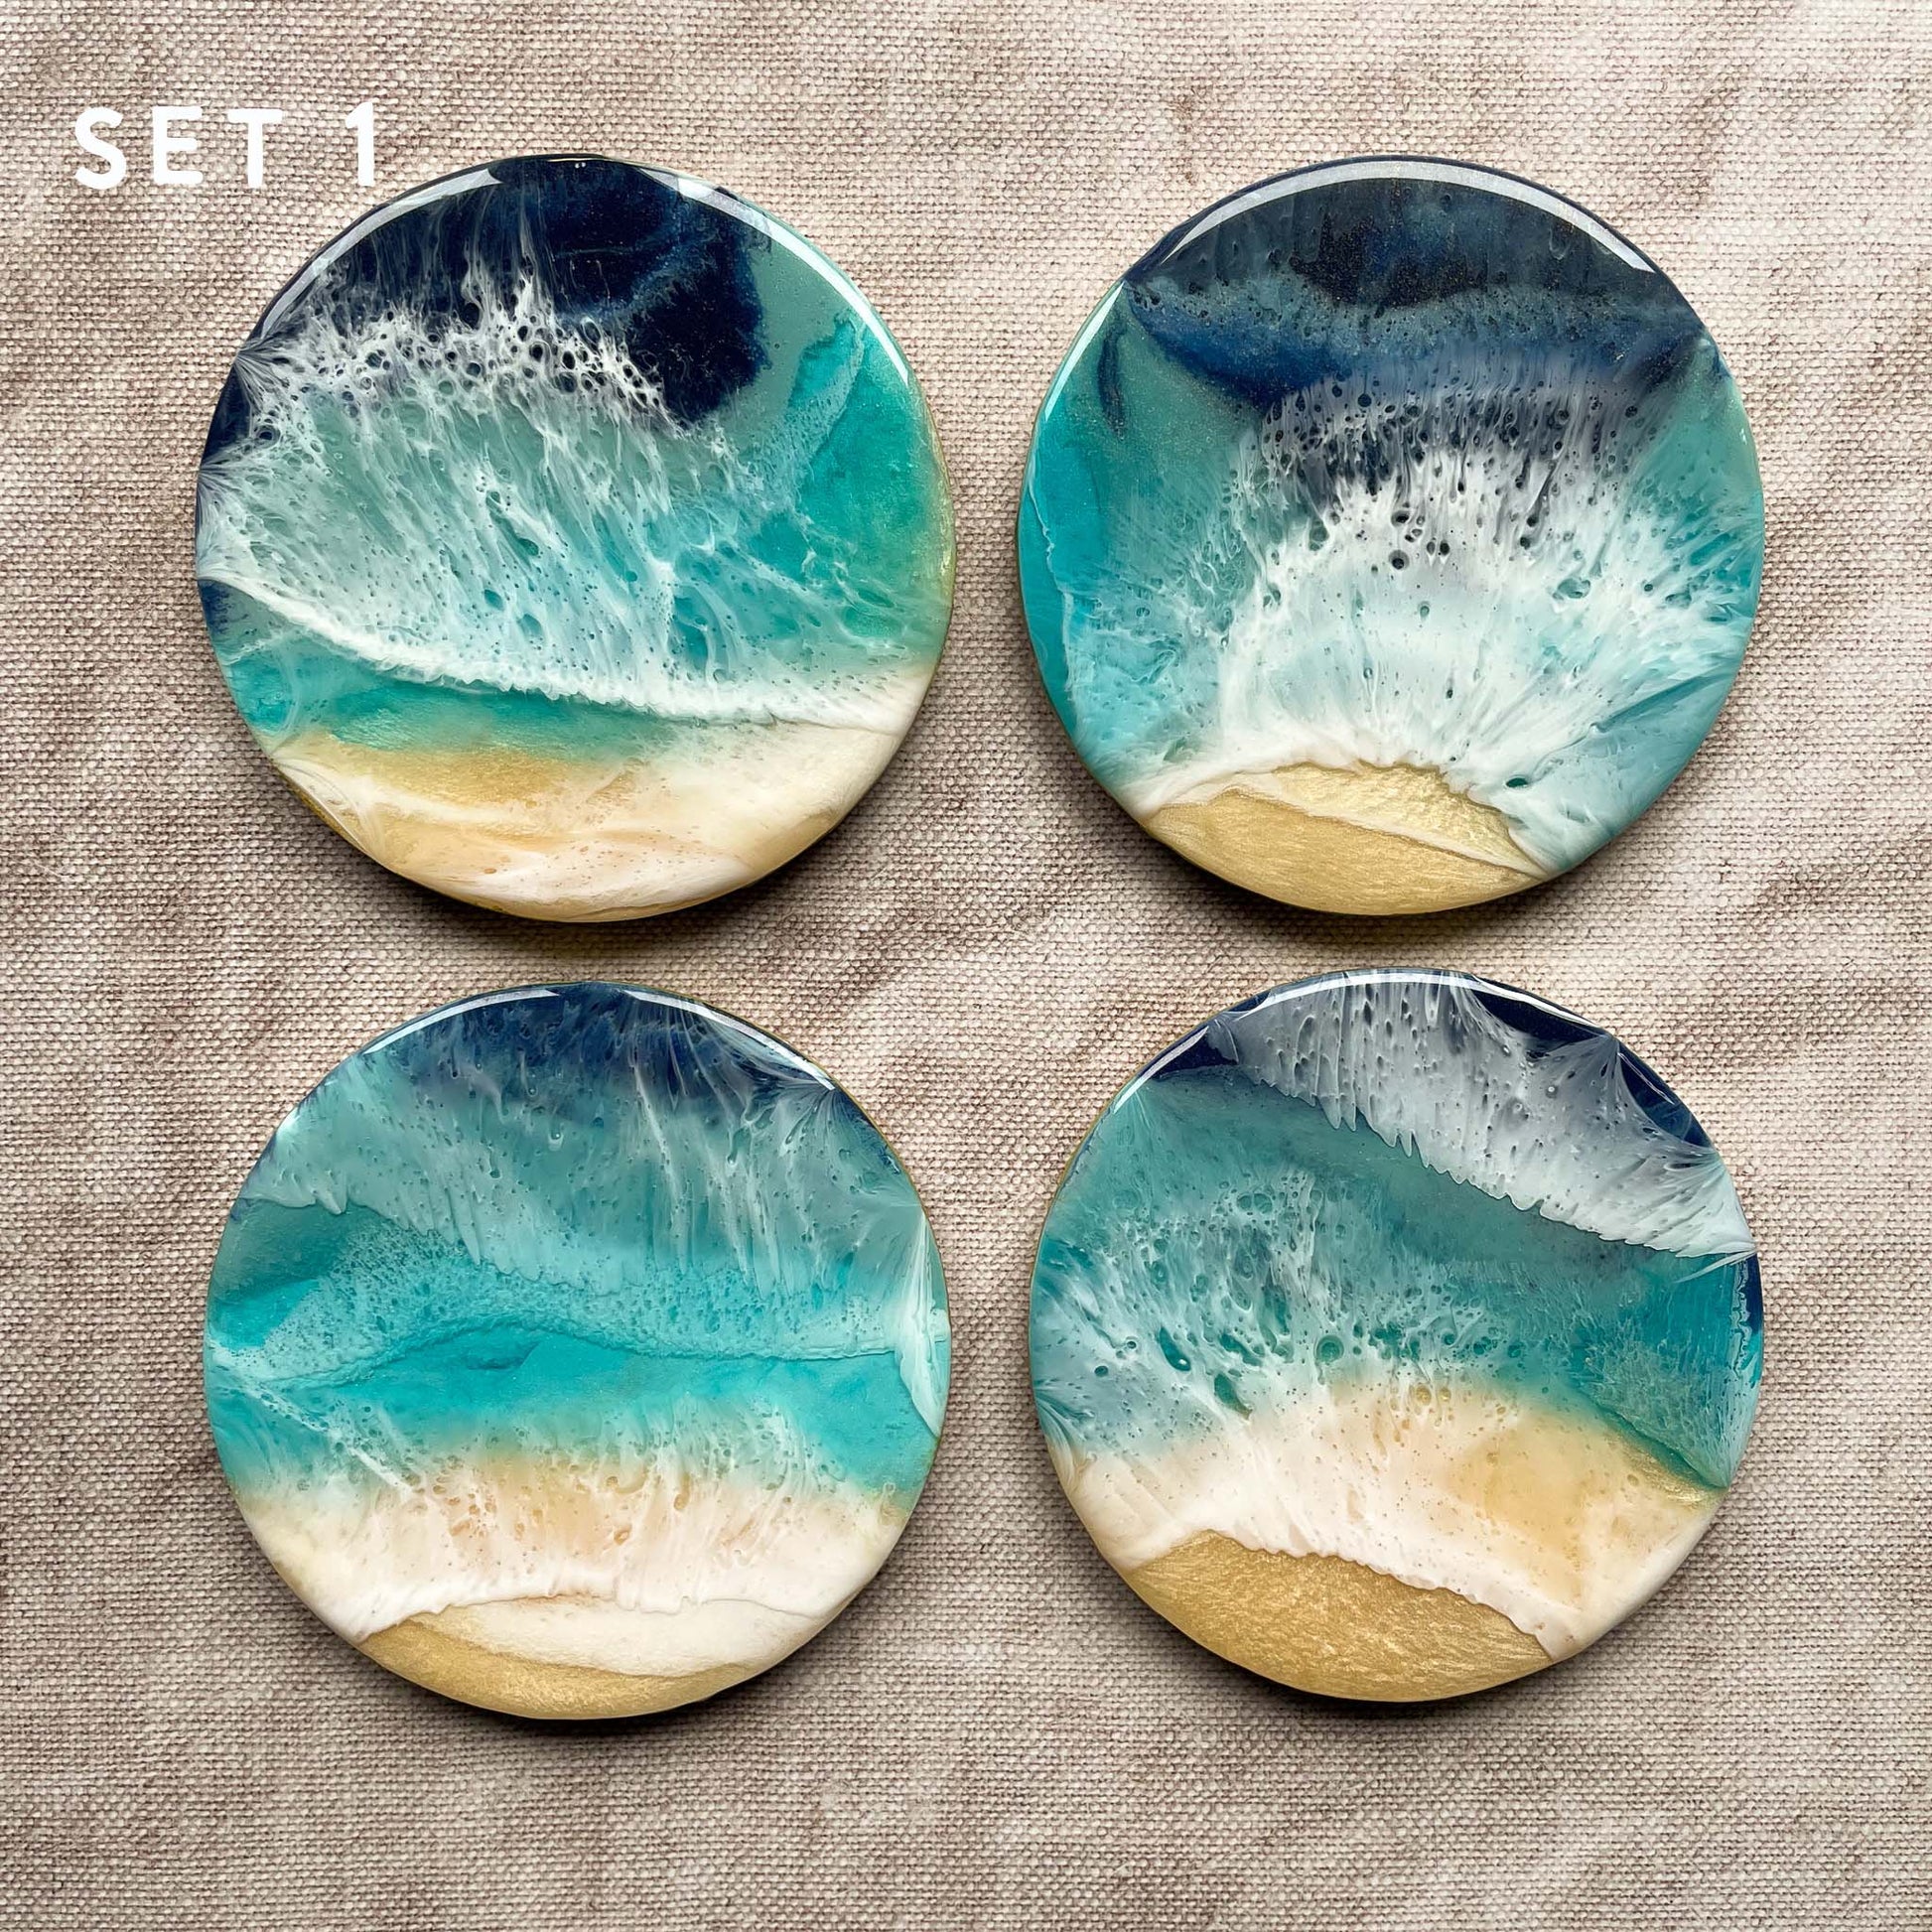 Unique gift idea for mothers, featuring ocean-inspired coasters for a touch of beachy elegance.